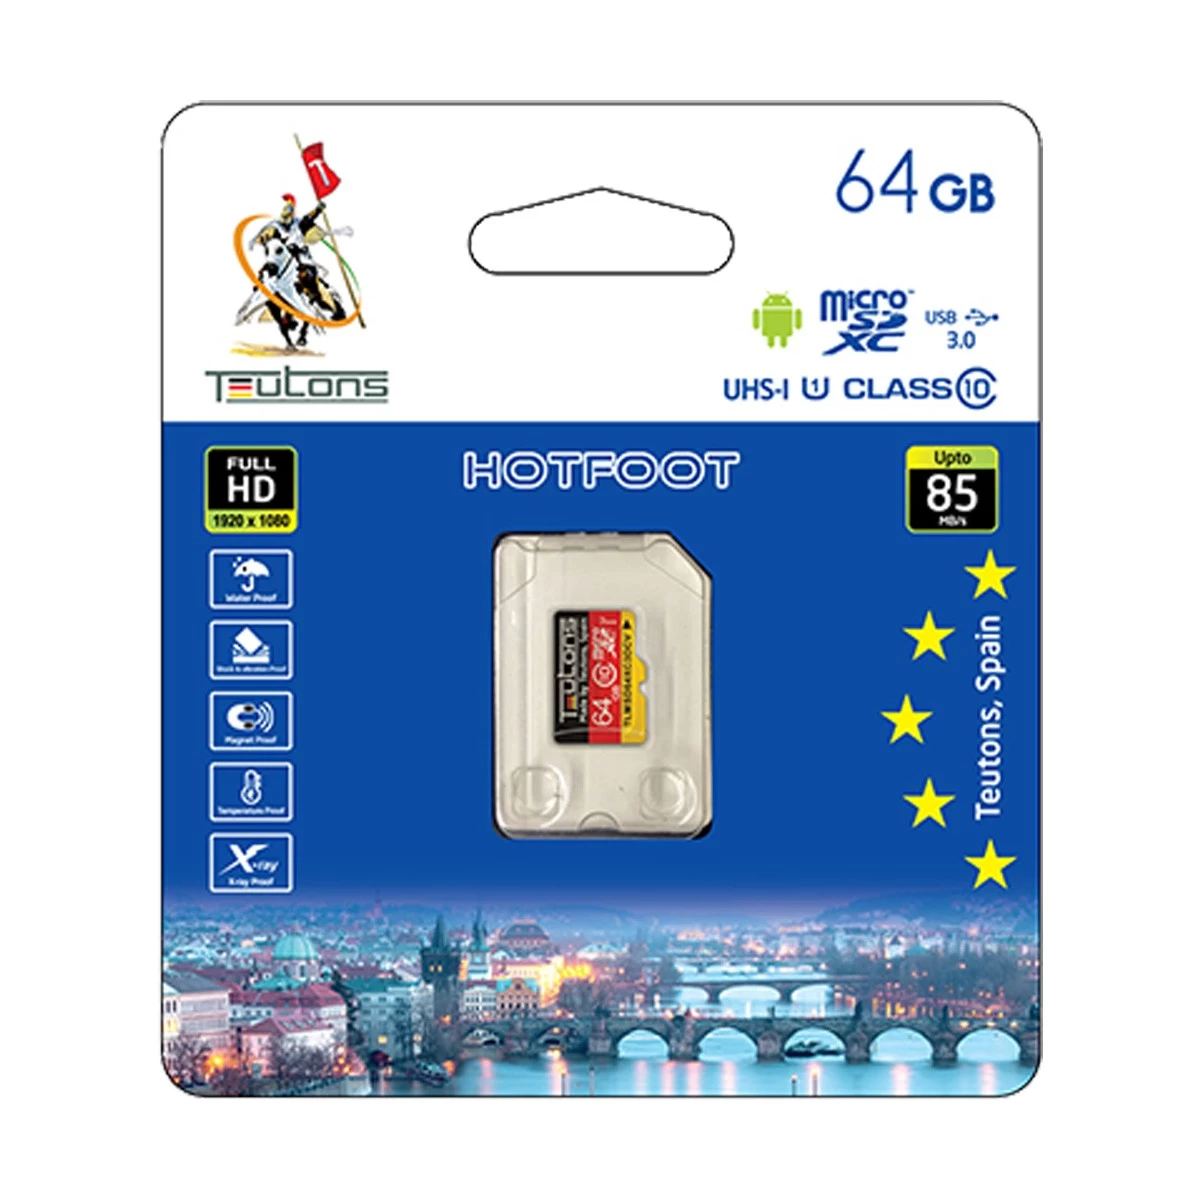 Teutons 64gb Micro Sdxc Memory Card Price In Teutons Memory Card